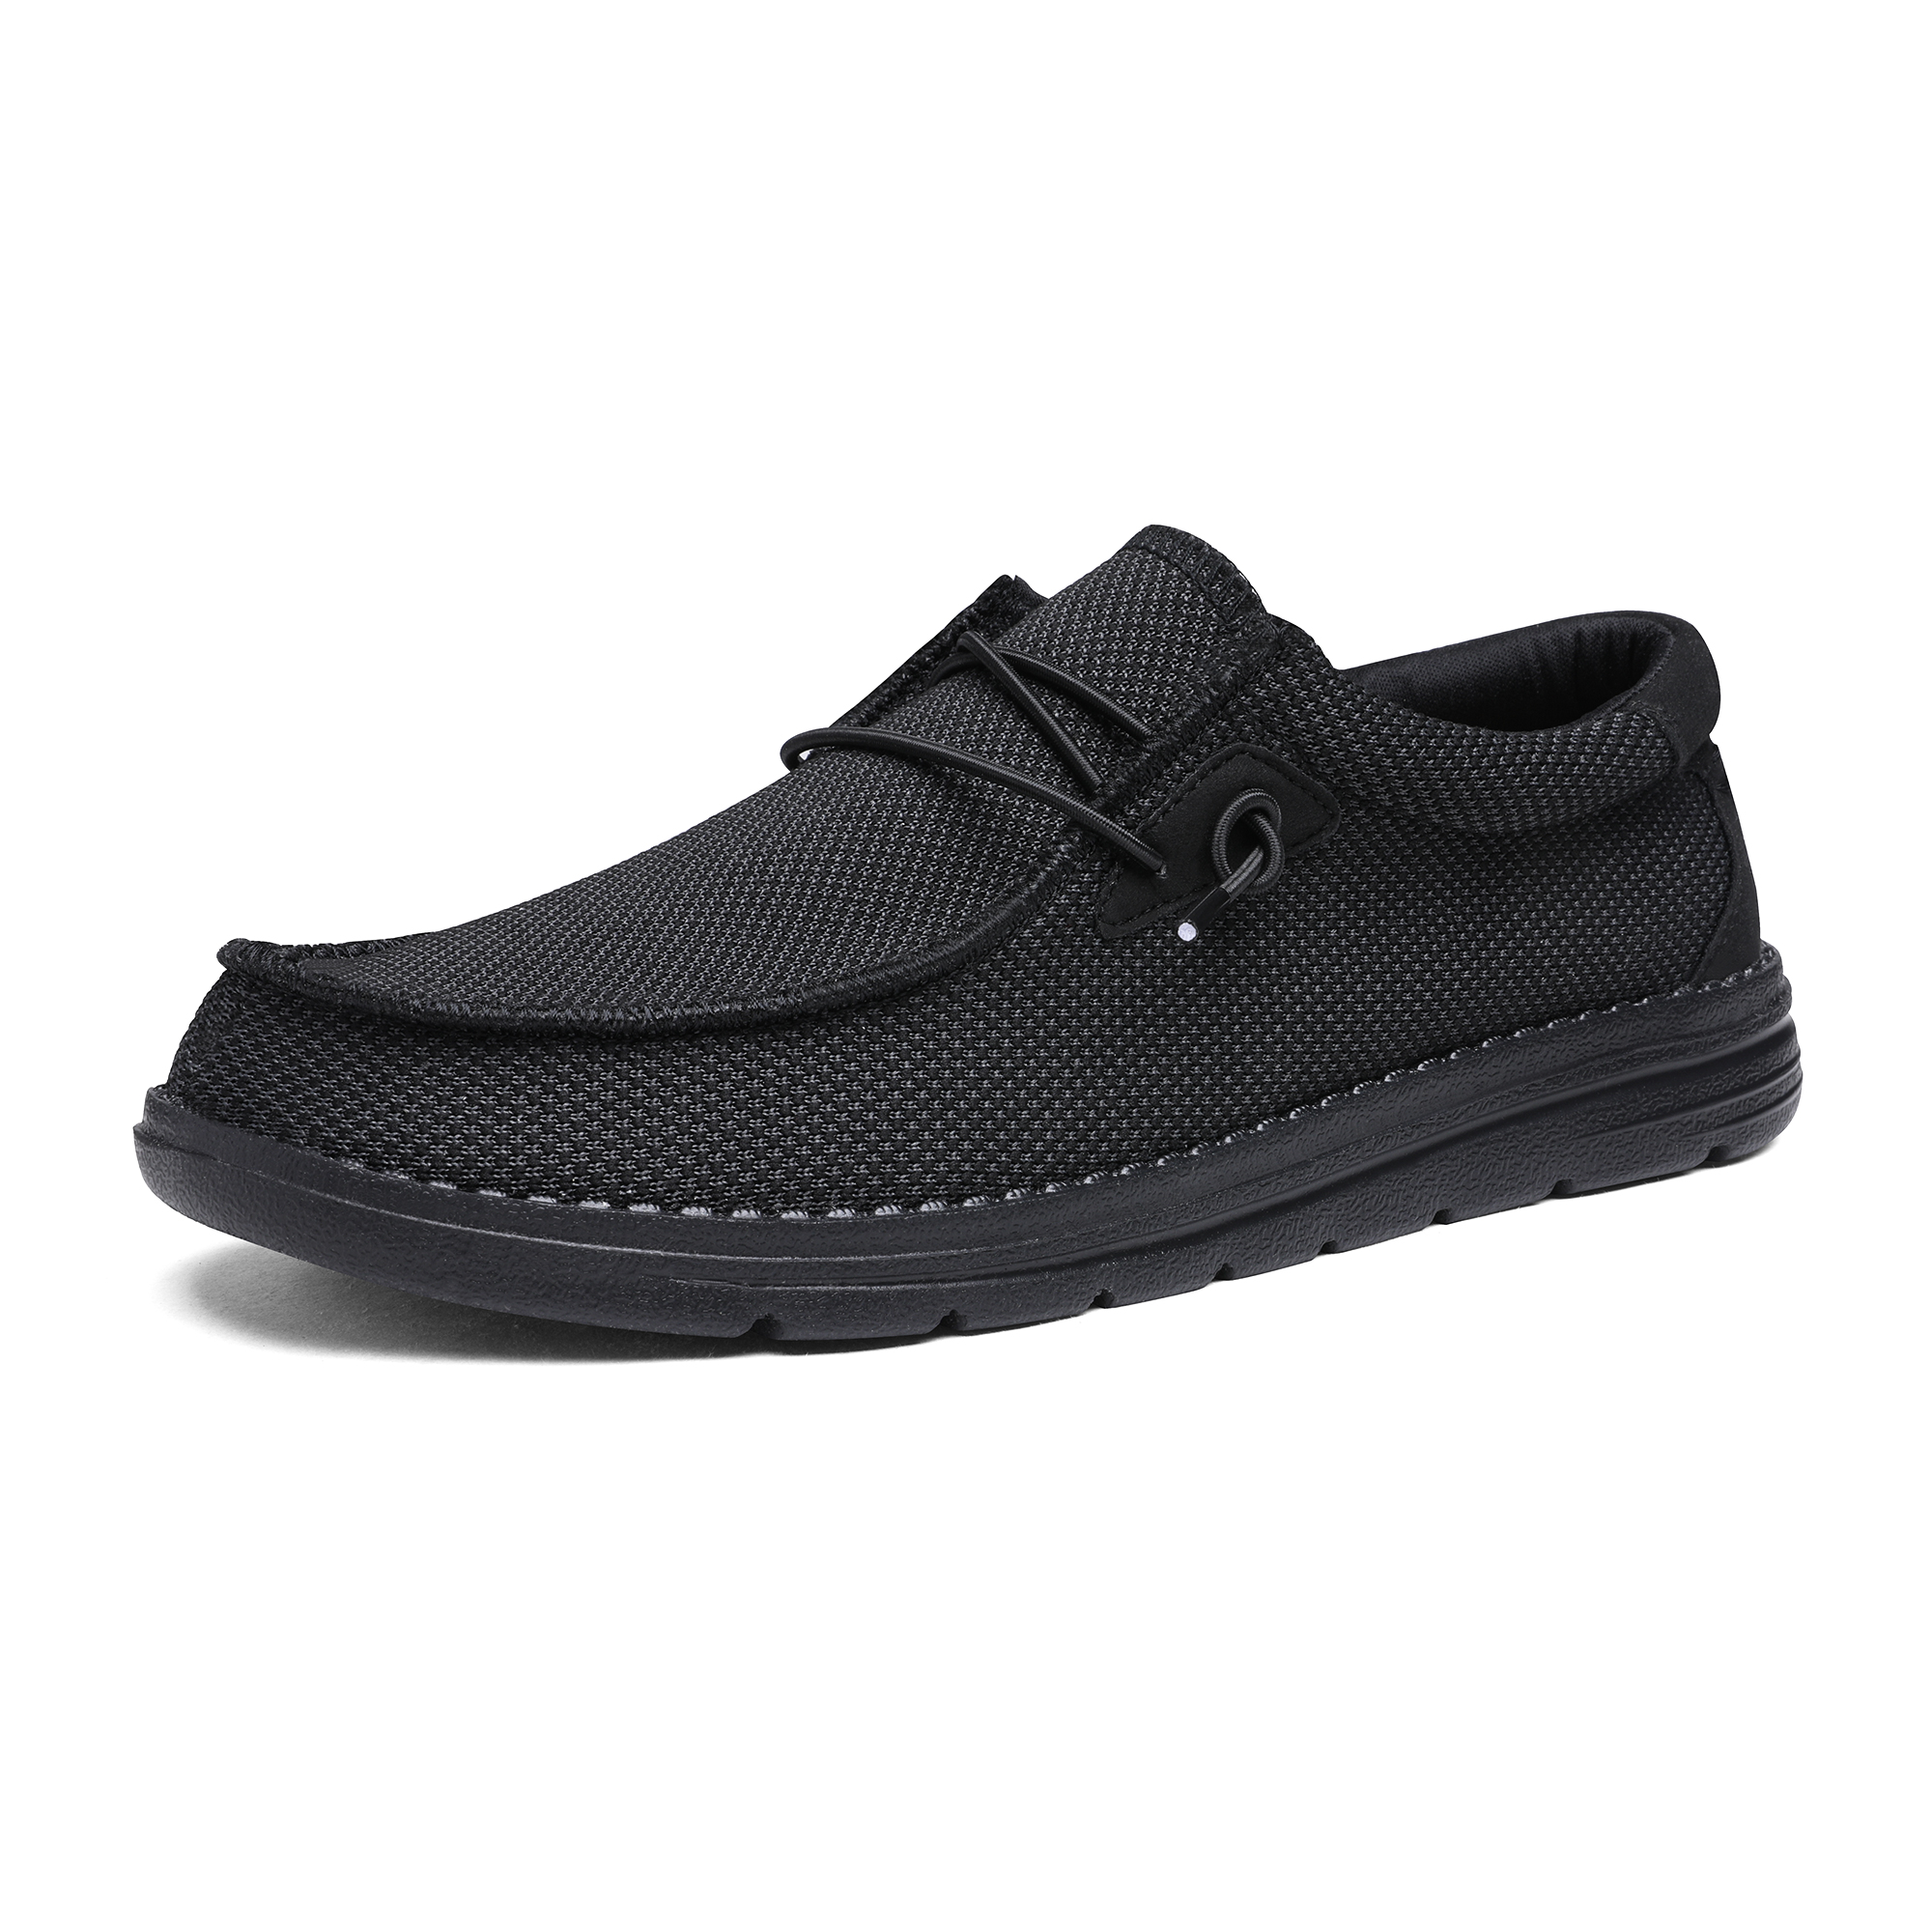 Bruno Marc Men's Comfort Tennis Shoes Casual Slip-on Loafers Lightweight Stretch Shoes Outdoor Indoor Sneakers BLS211 BLACK Size 9 - image 1 of 5